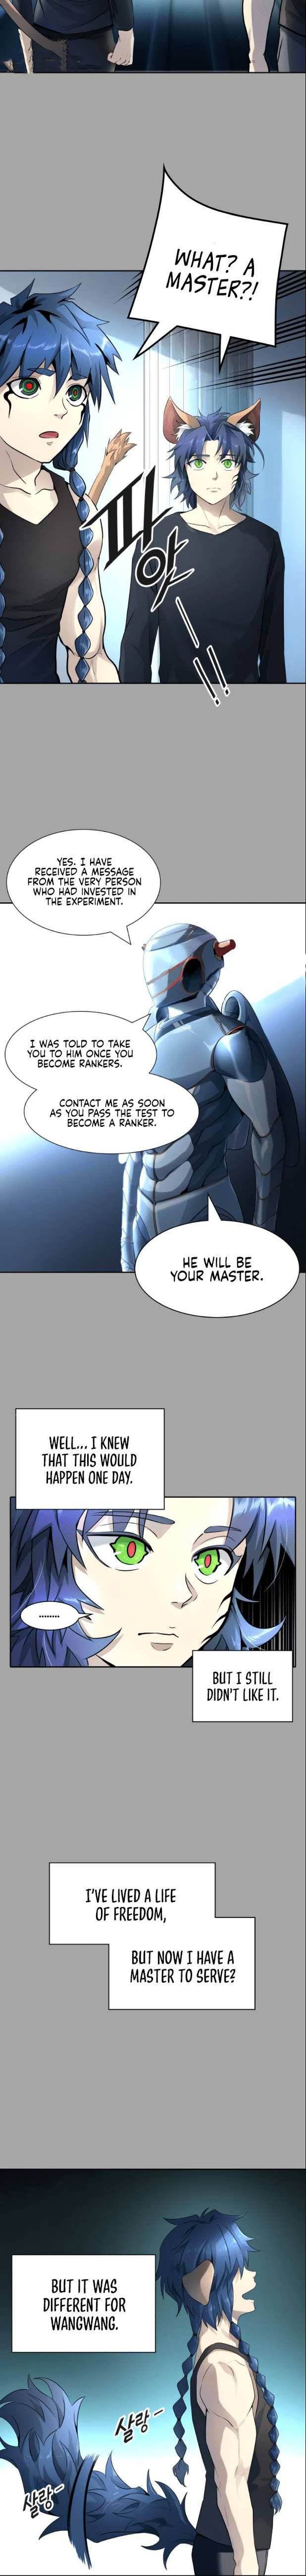 Tower Of God Chapter 526 Page 10